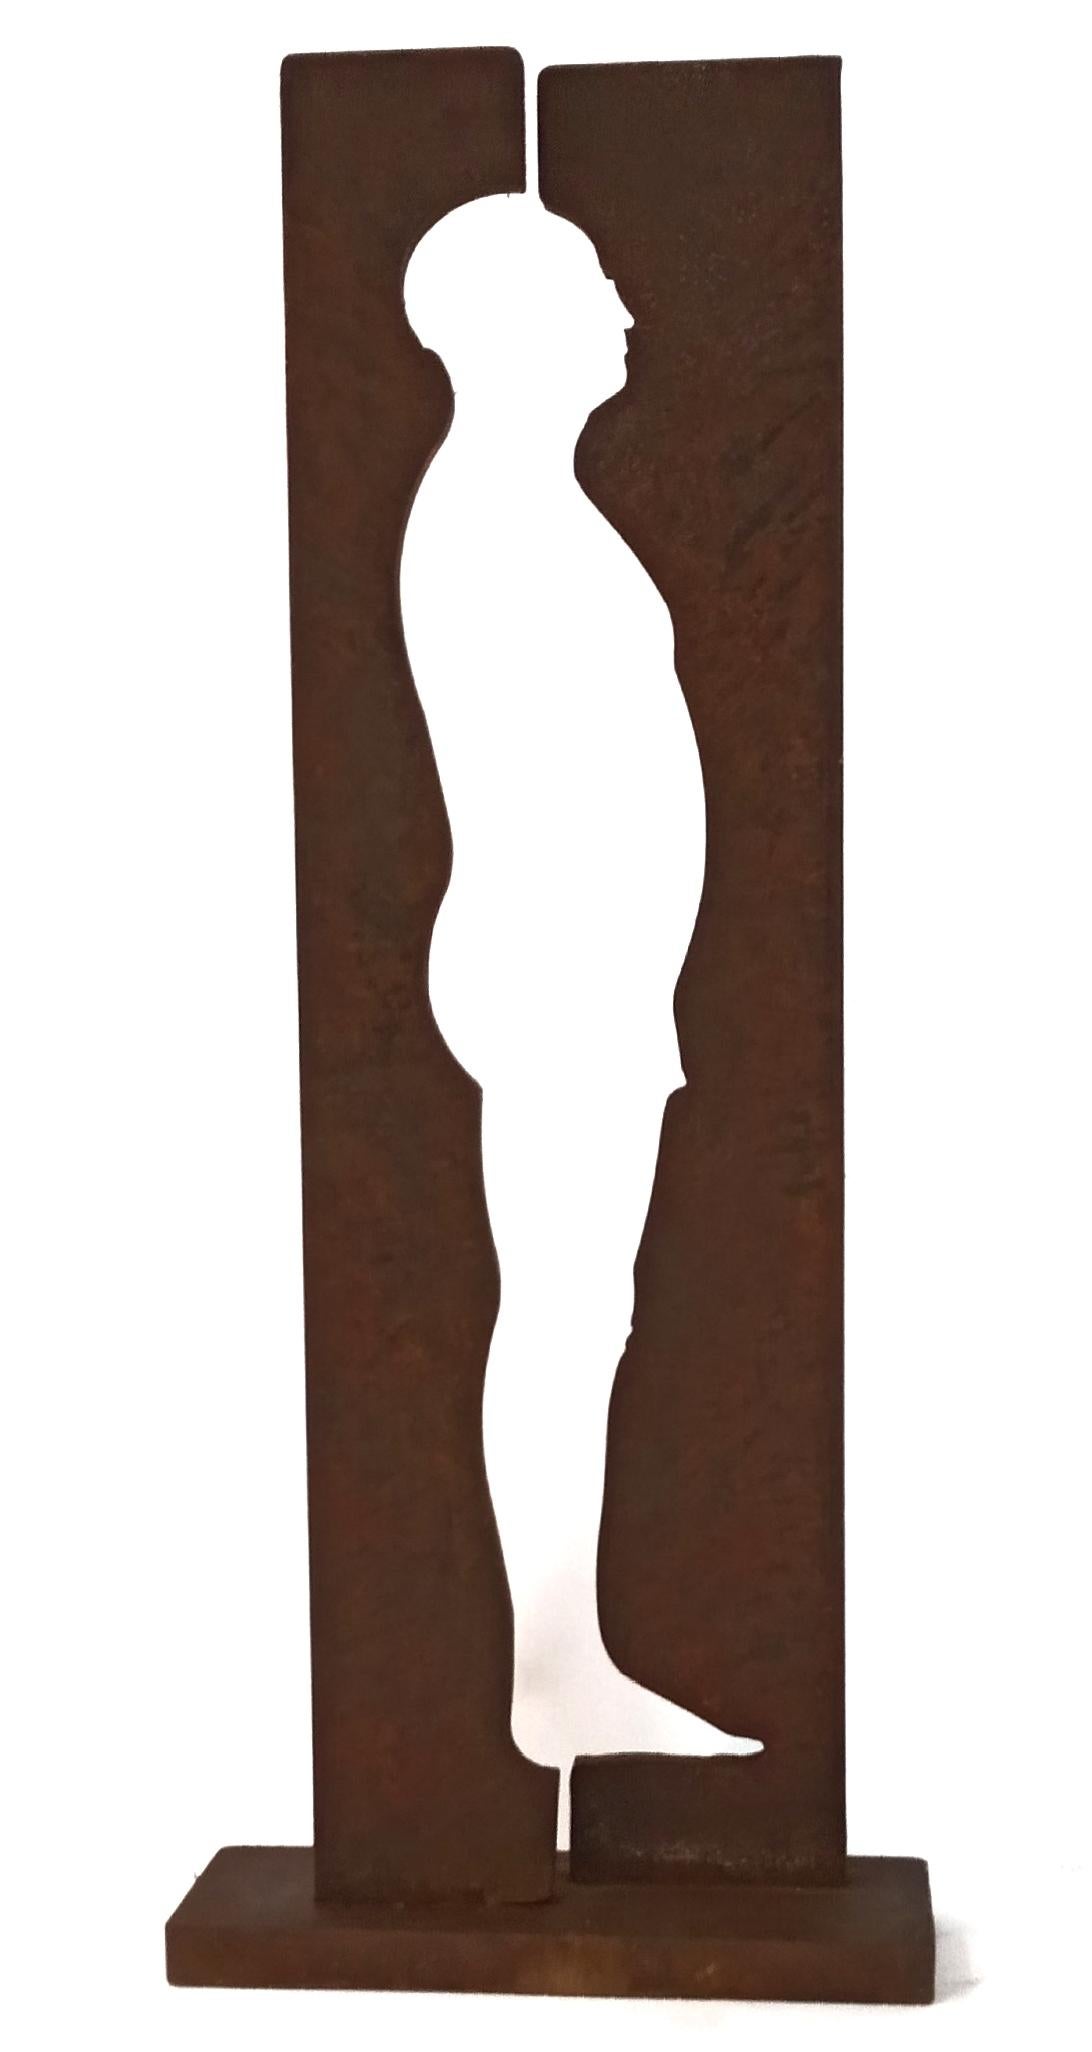 Limited Edition Medium Sized Rusted Steel Sculpture "Man Up"